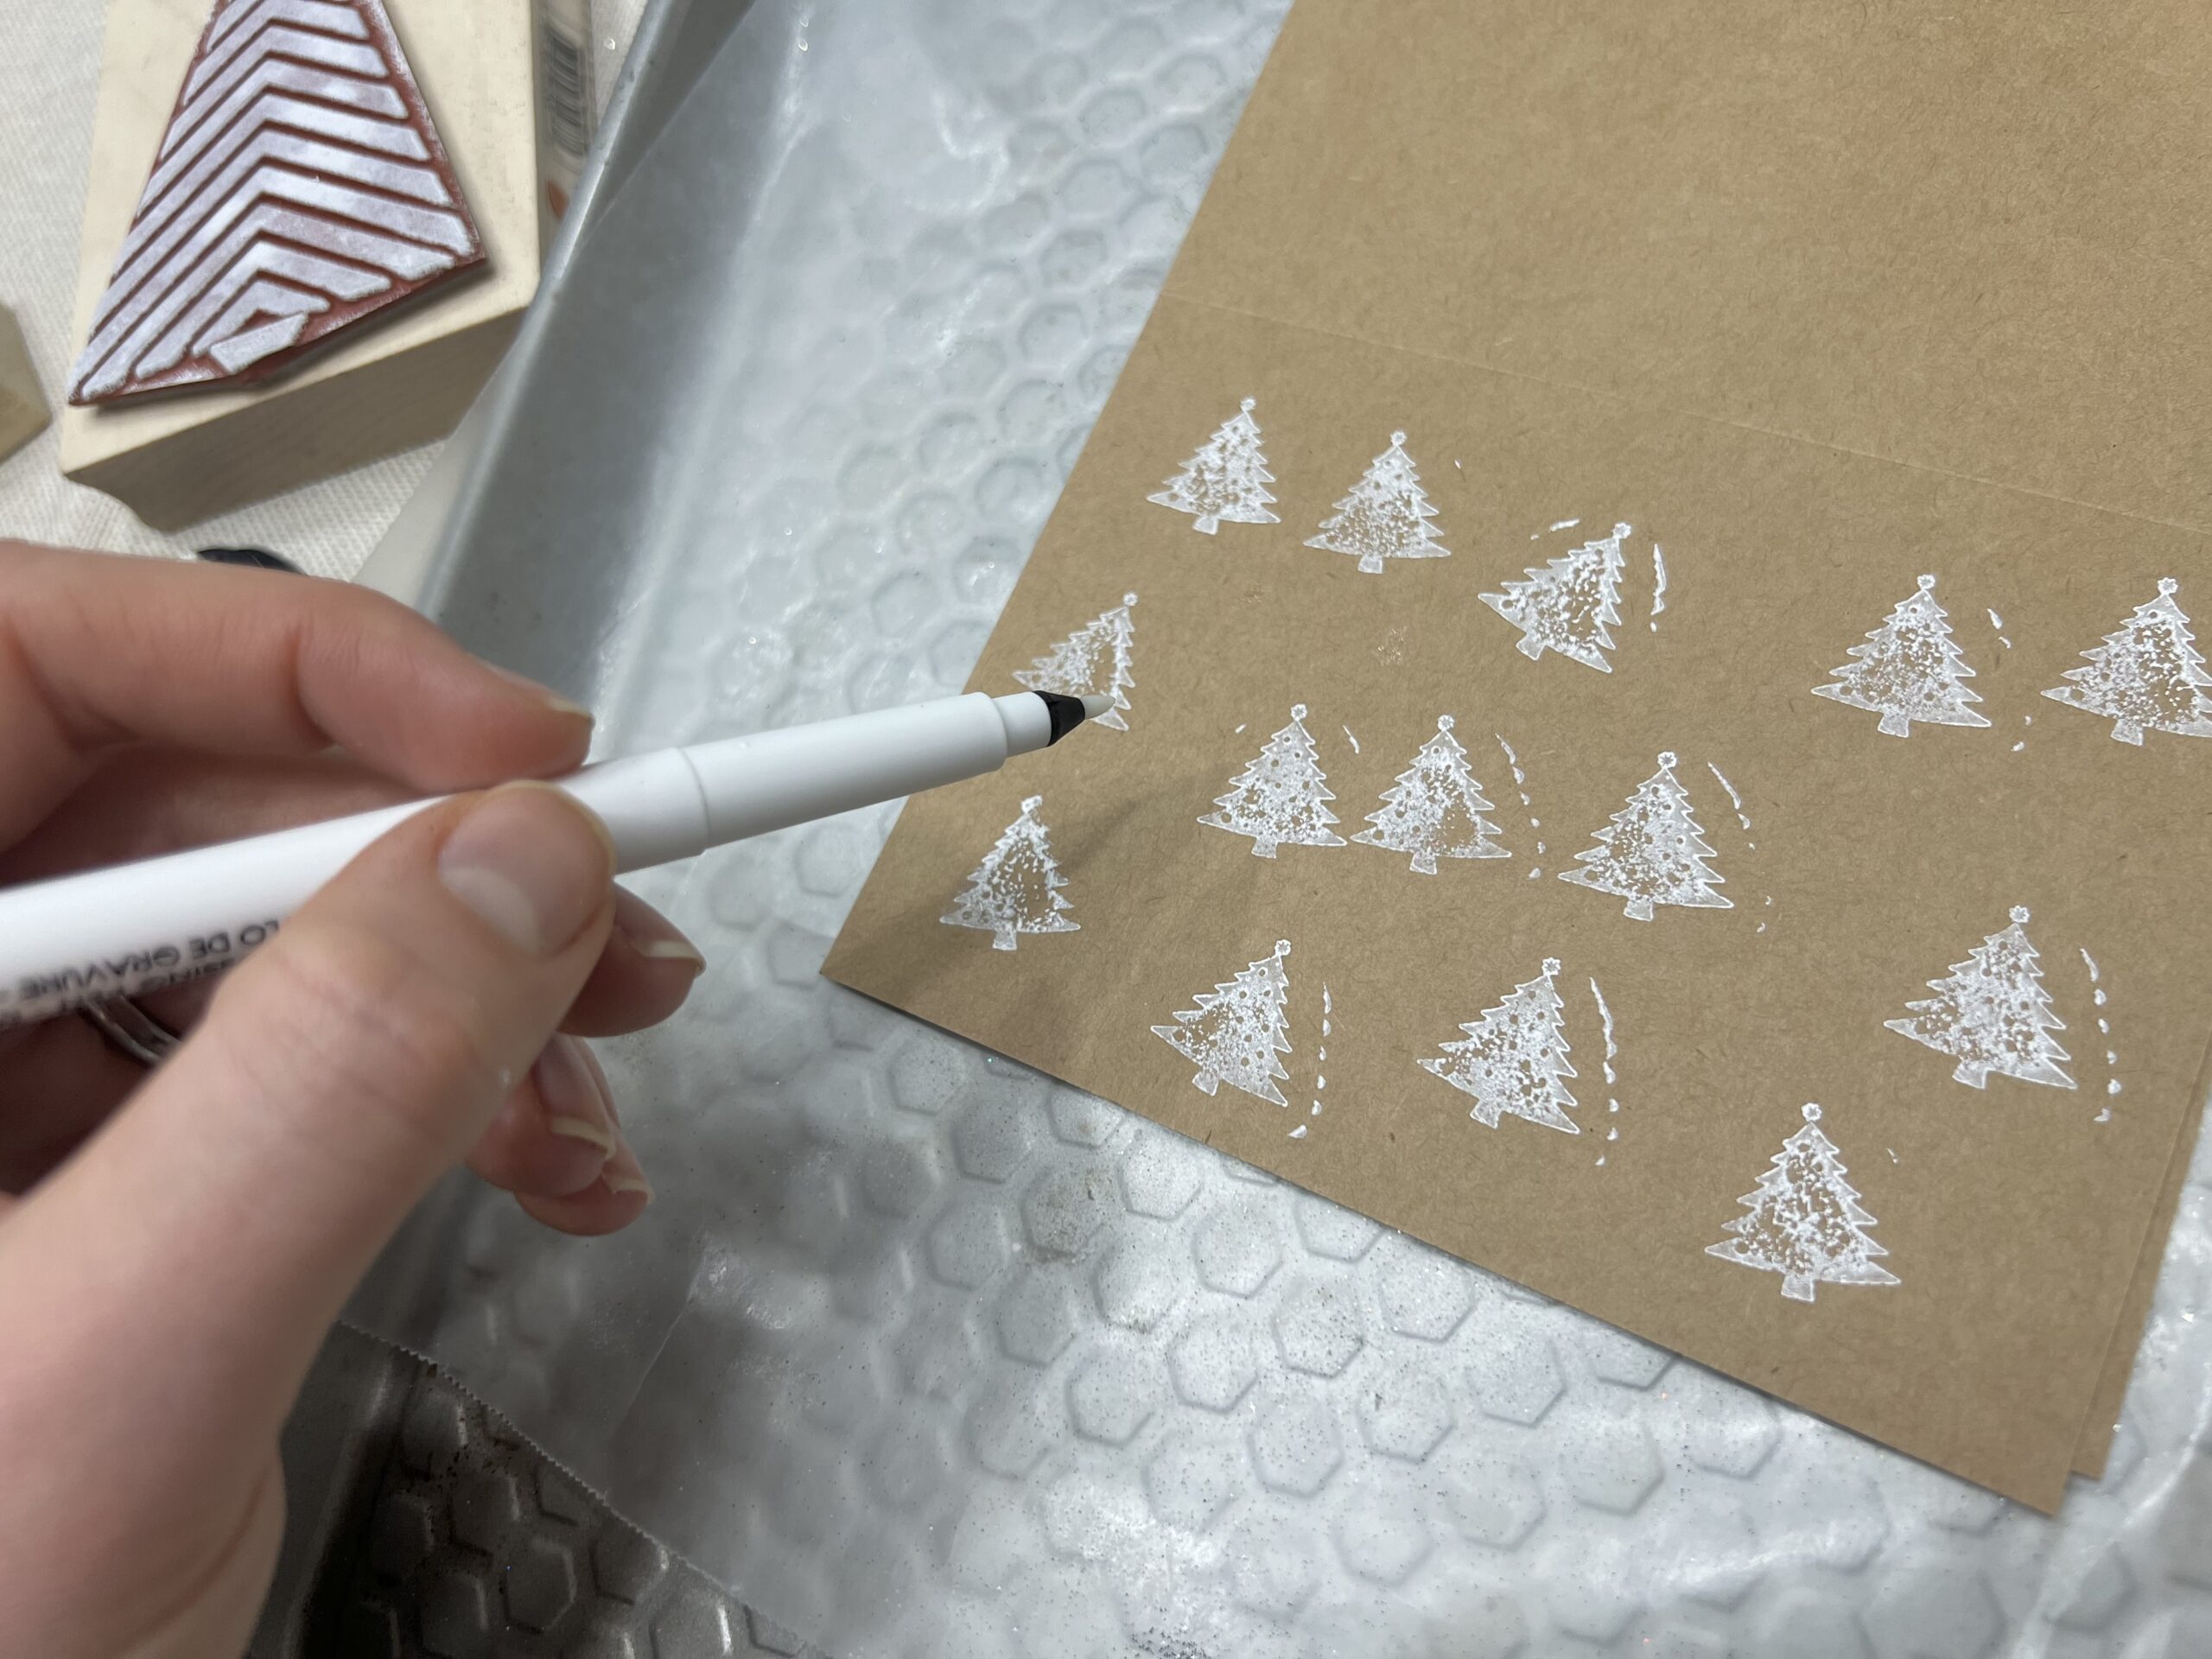 Adding little details to Christmas tree pattern